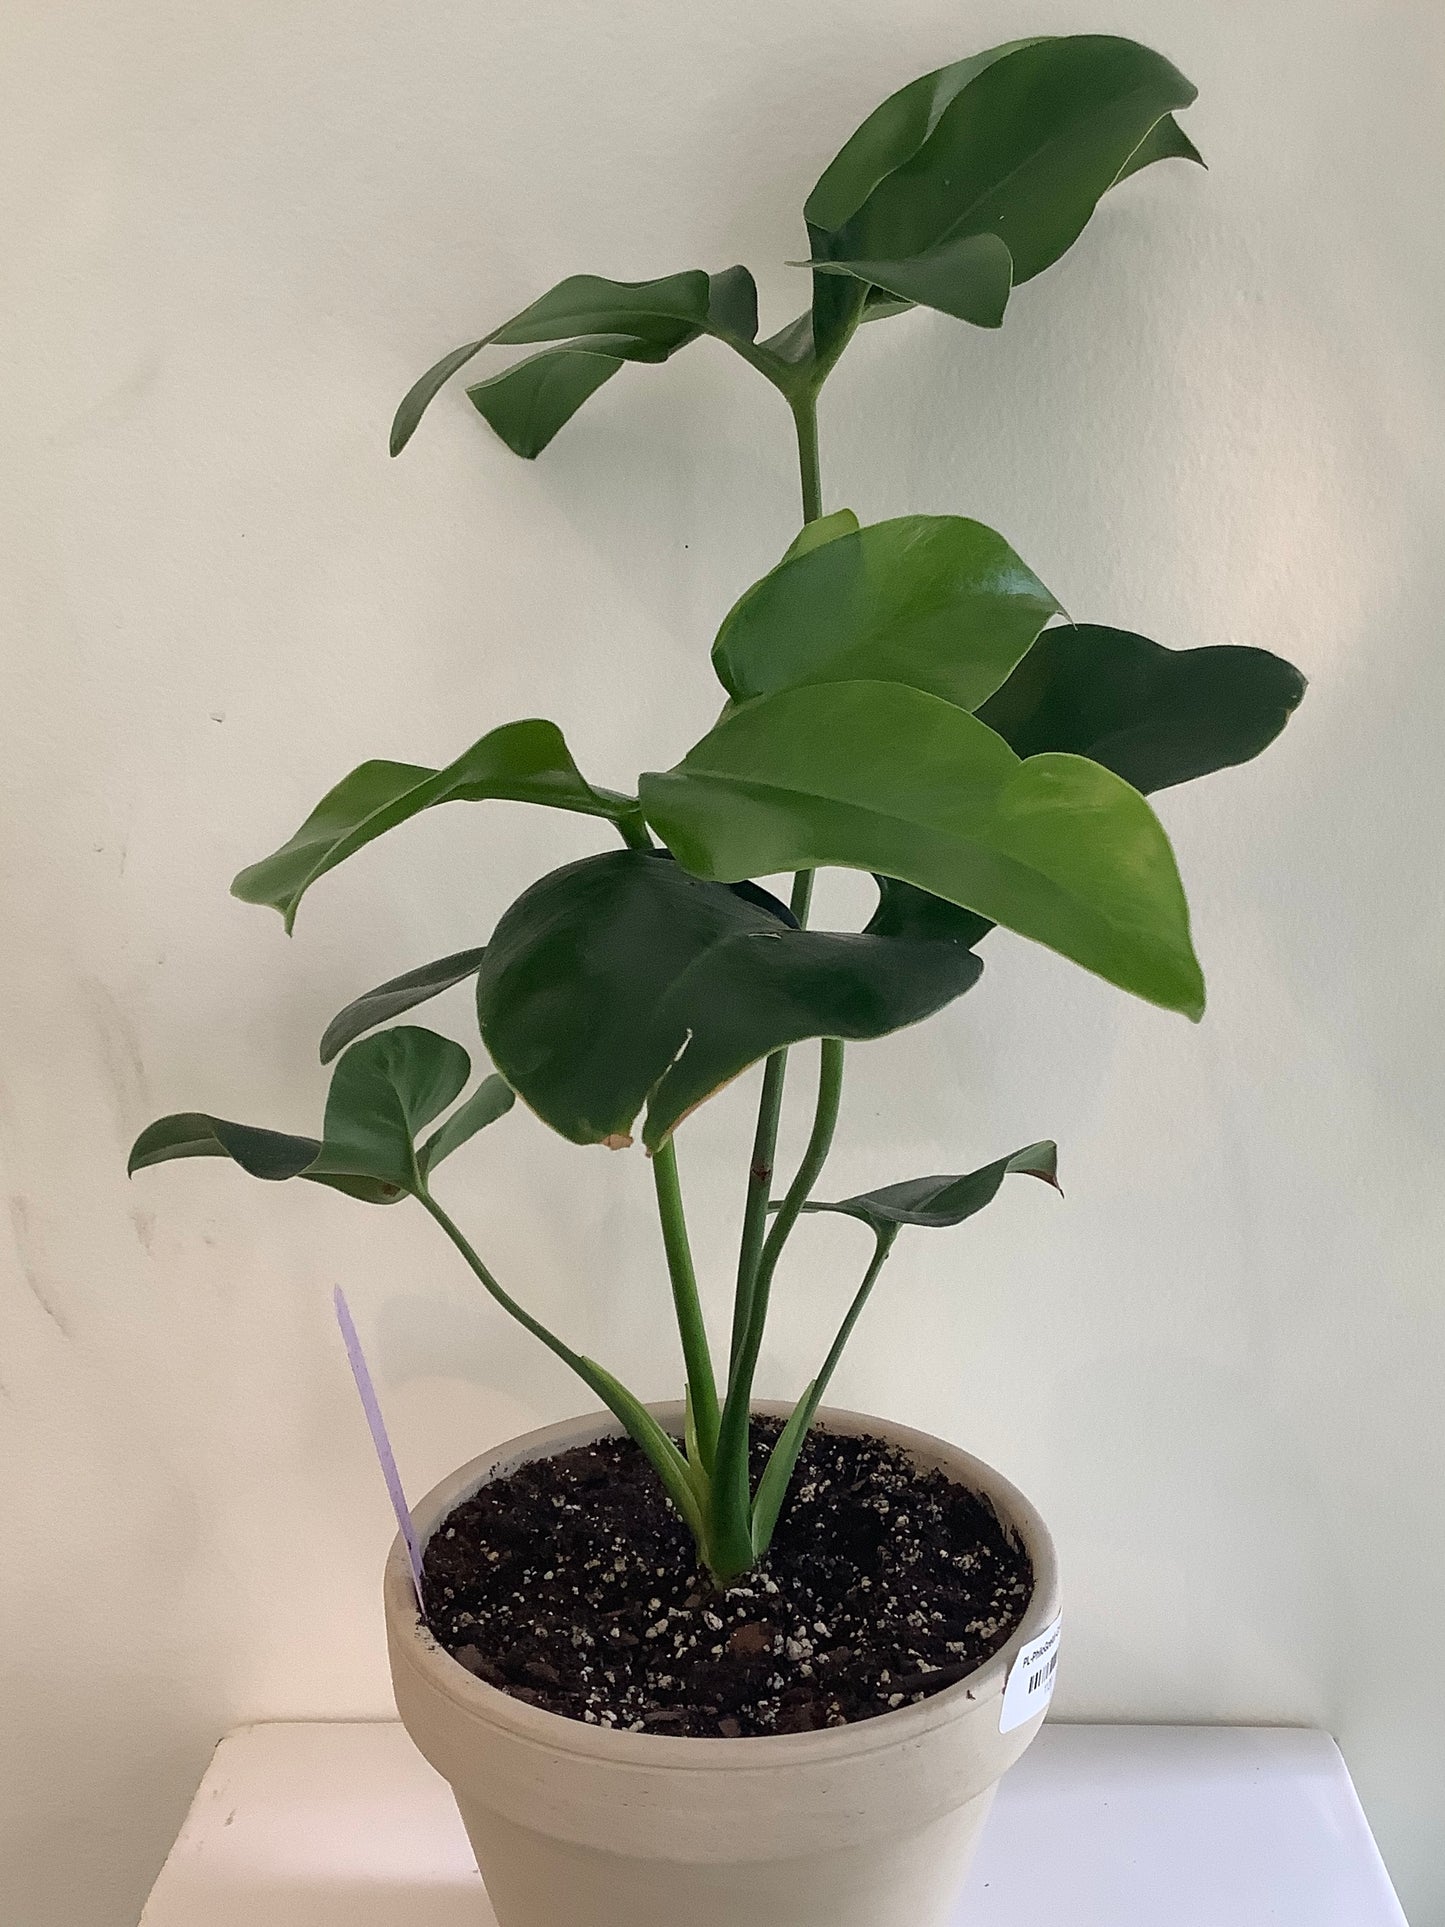 Philodendron Goeldii "Finger Leaf" Plant - 6" Container